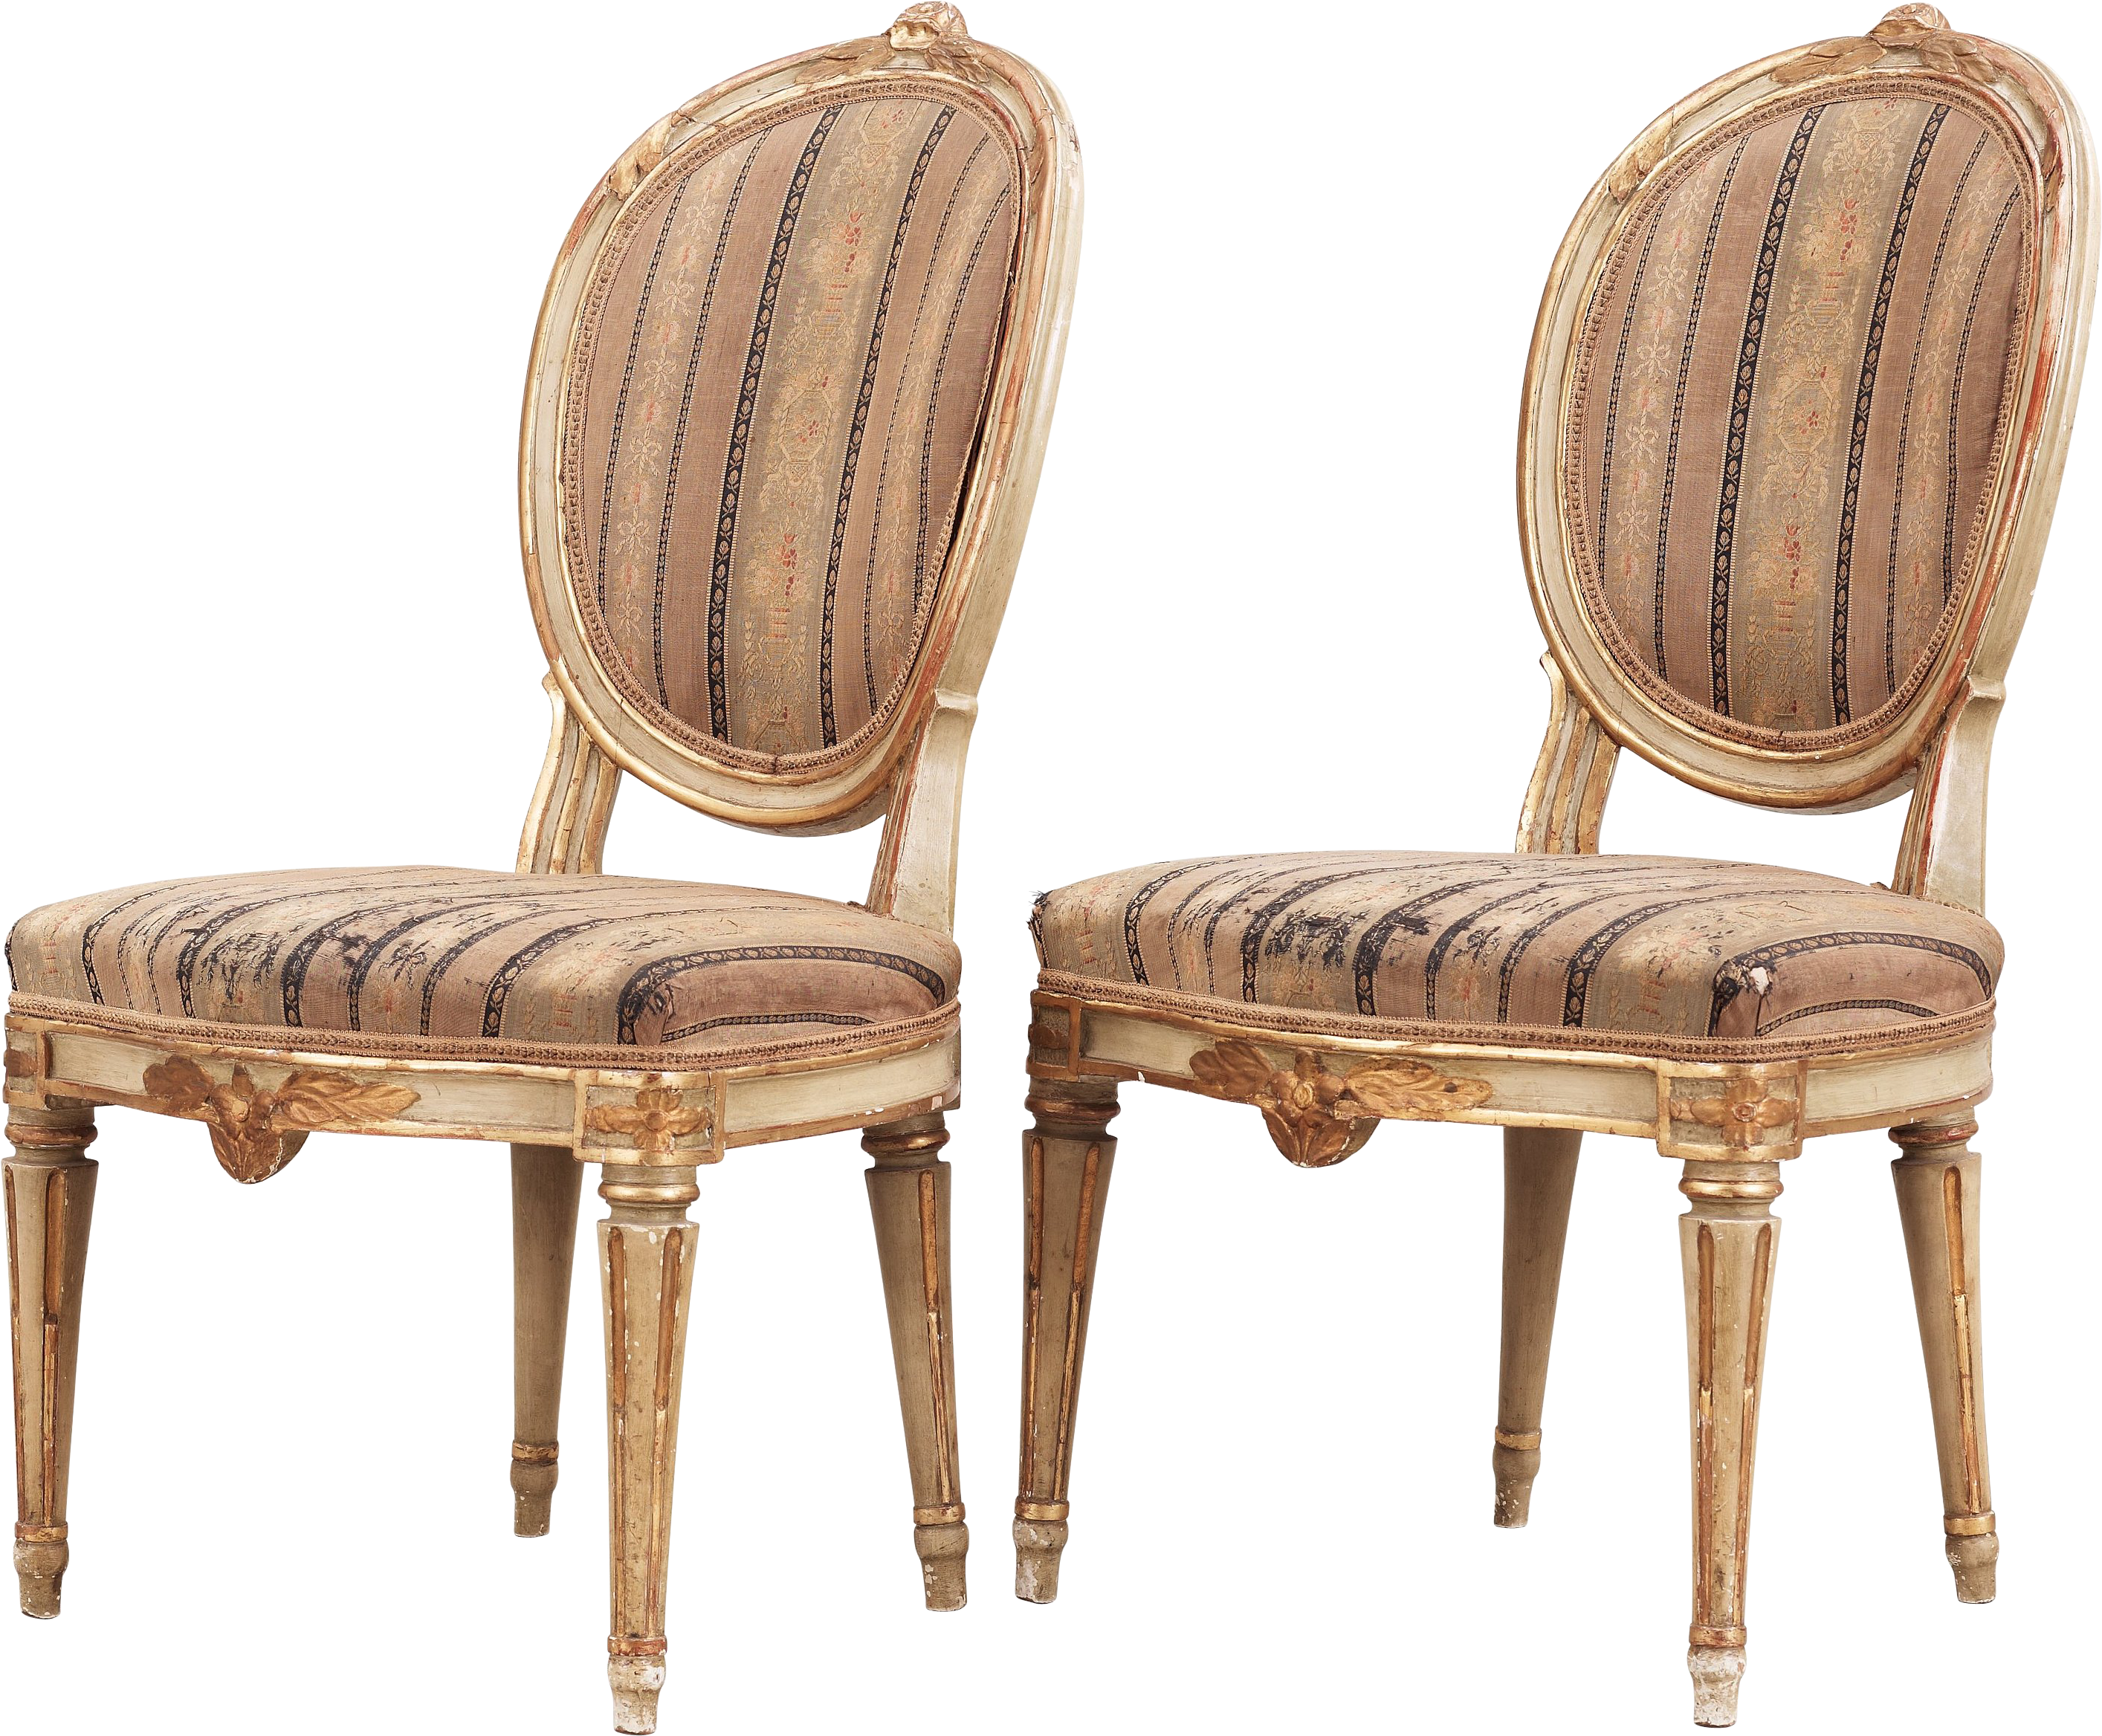 Chair PNG images 